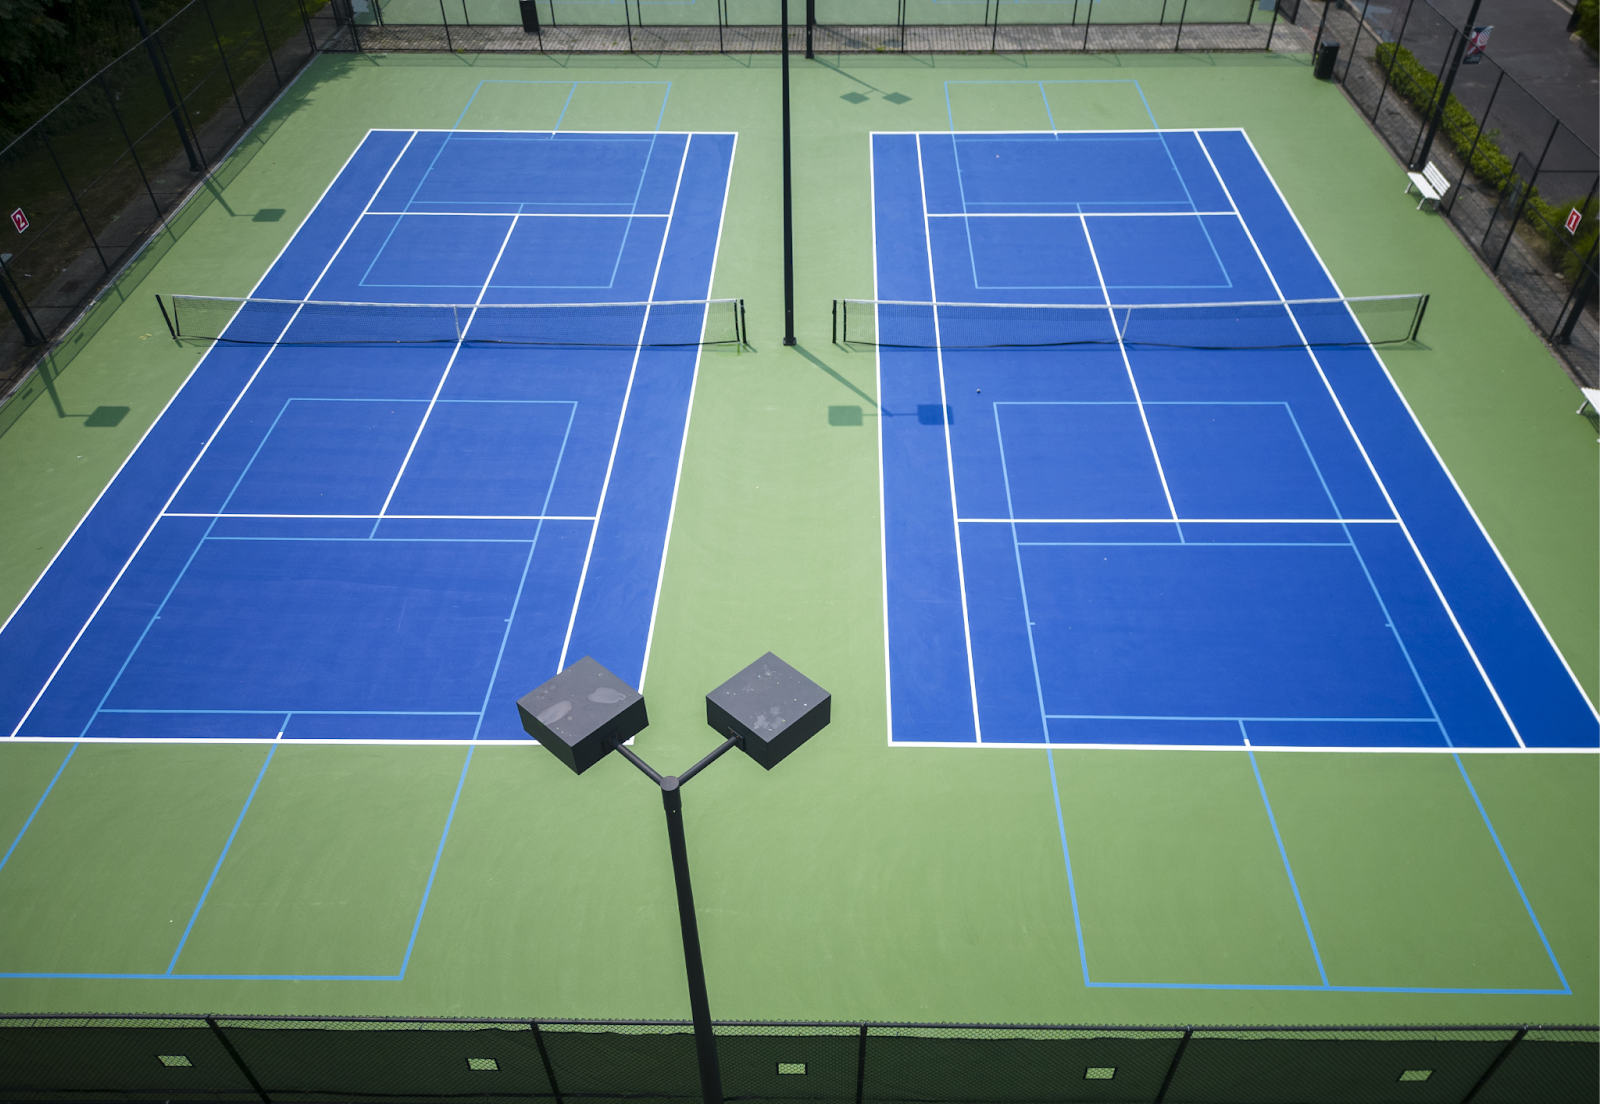 Why Should You Upgrade Your Tennis Court Lighting